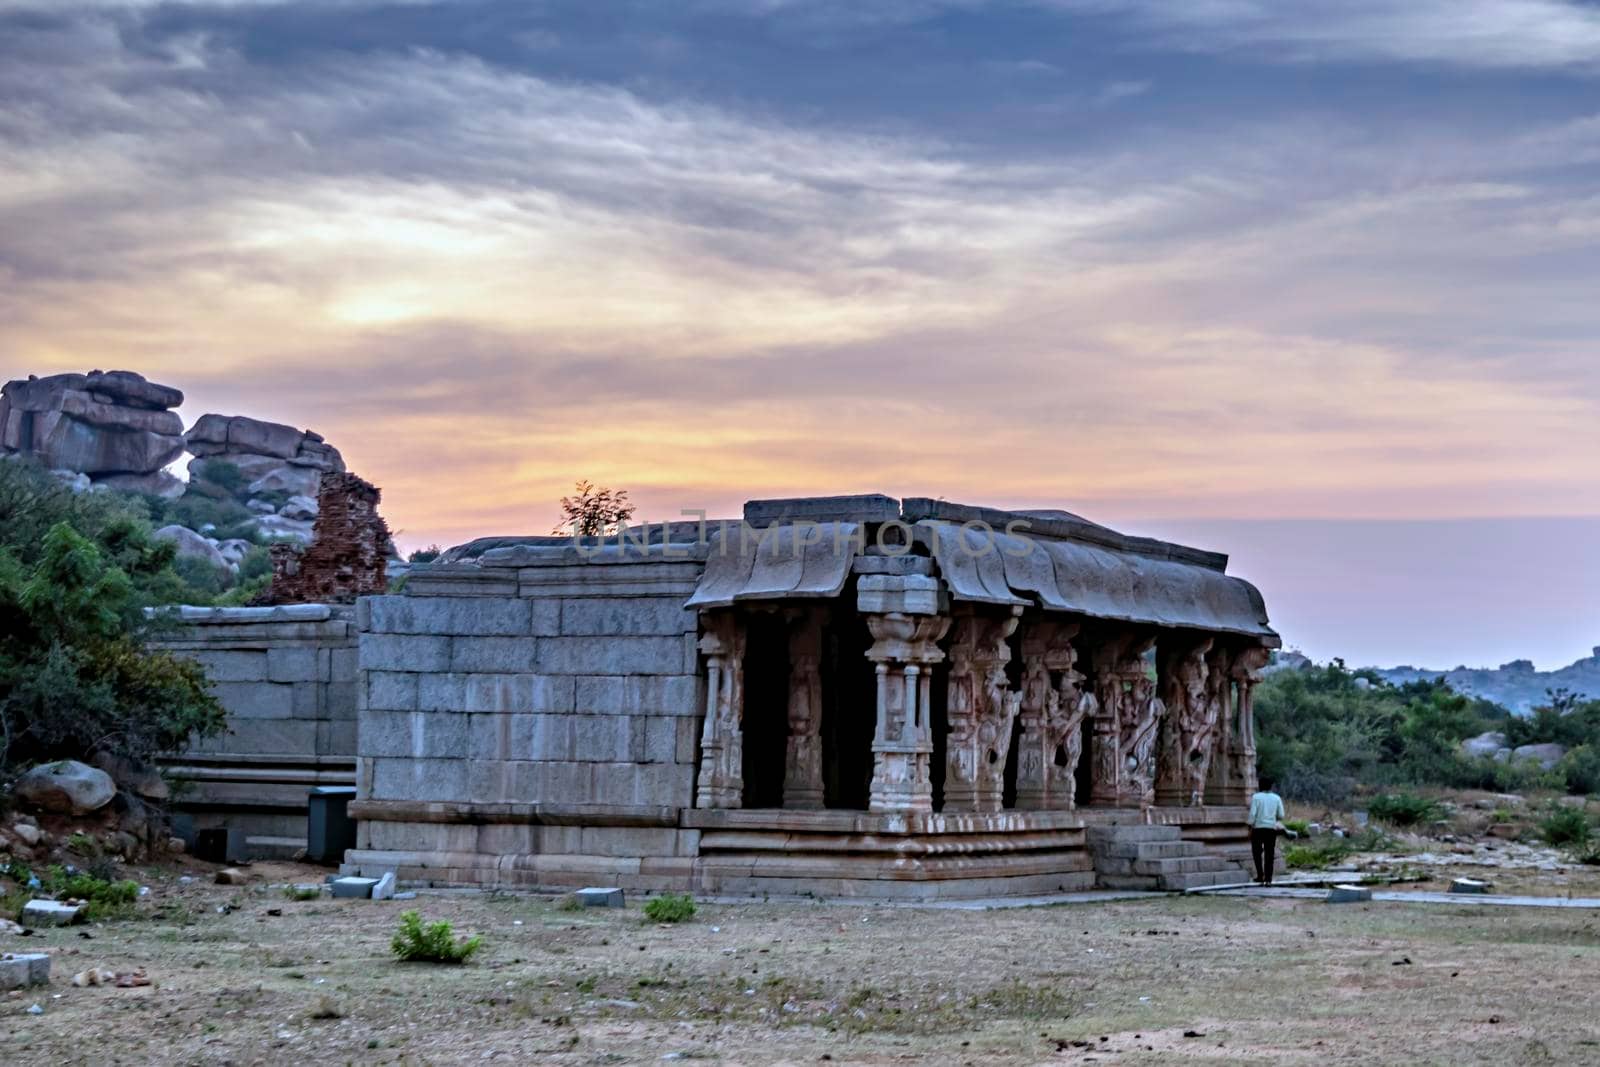 Sunset behind ancient stone temple in Vitthala temple complex in Hampi. by lalam